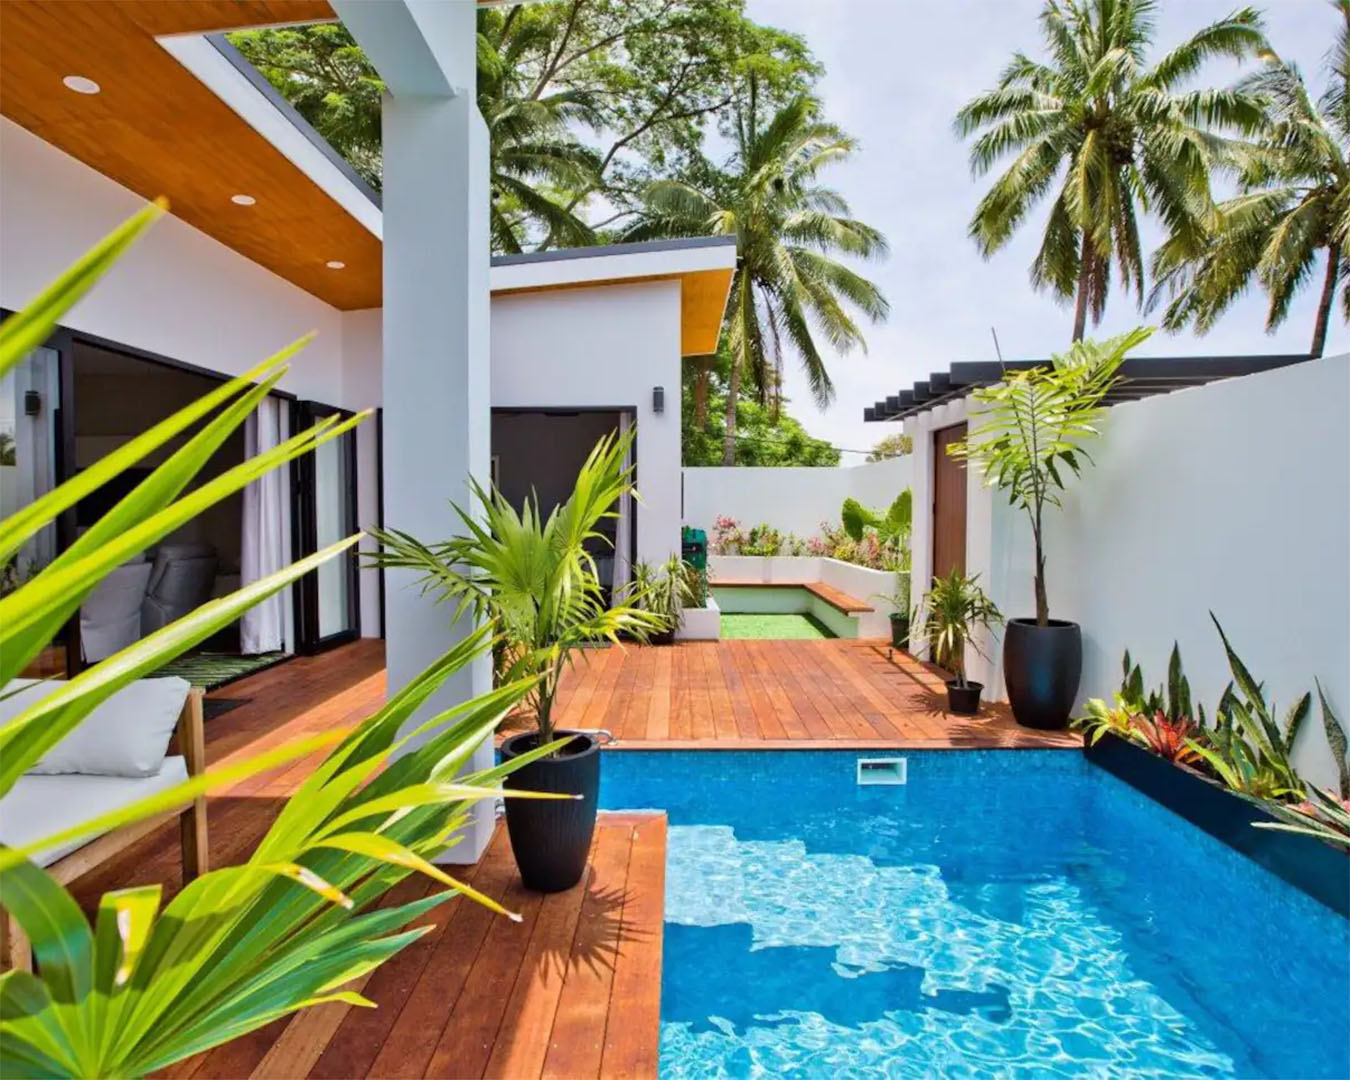 A stunning airbnb in Raro shows a pool and expansive living area with a wooden deck.